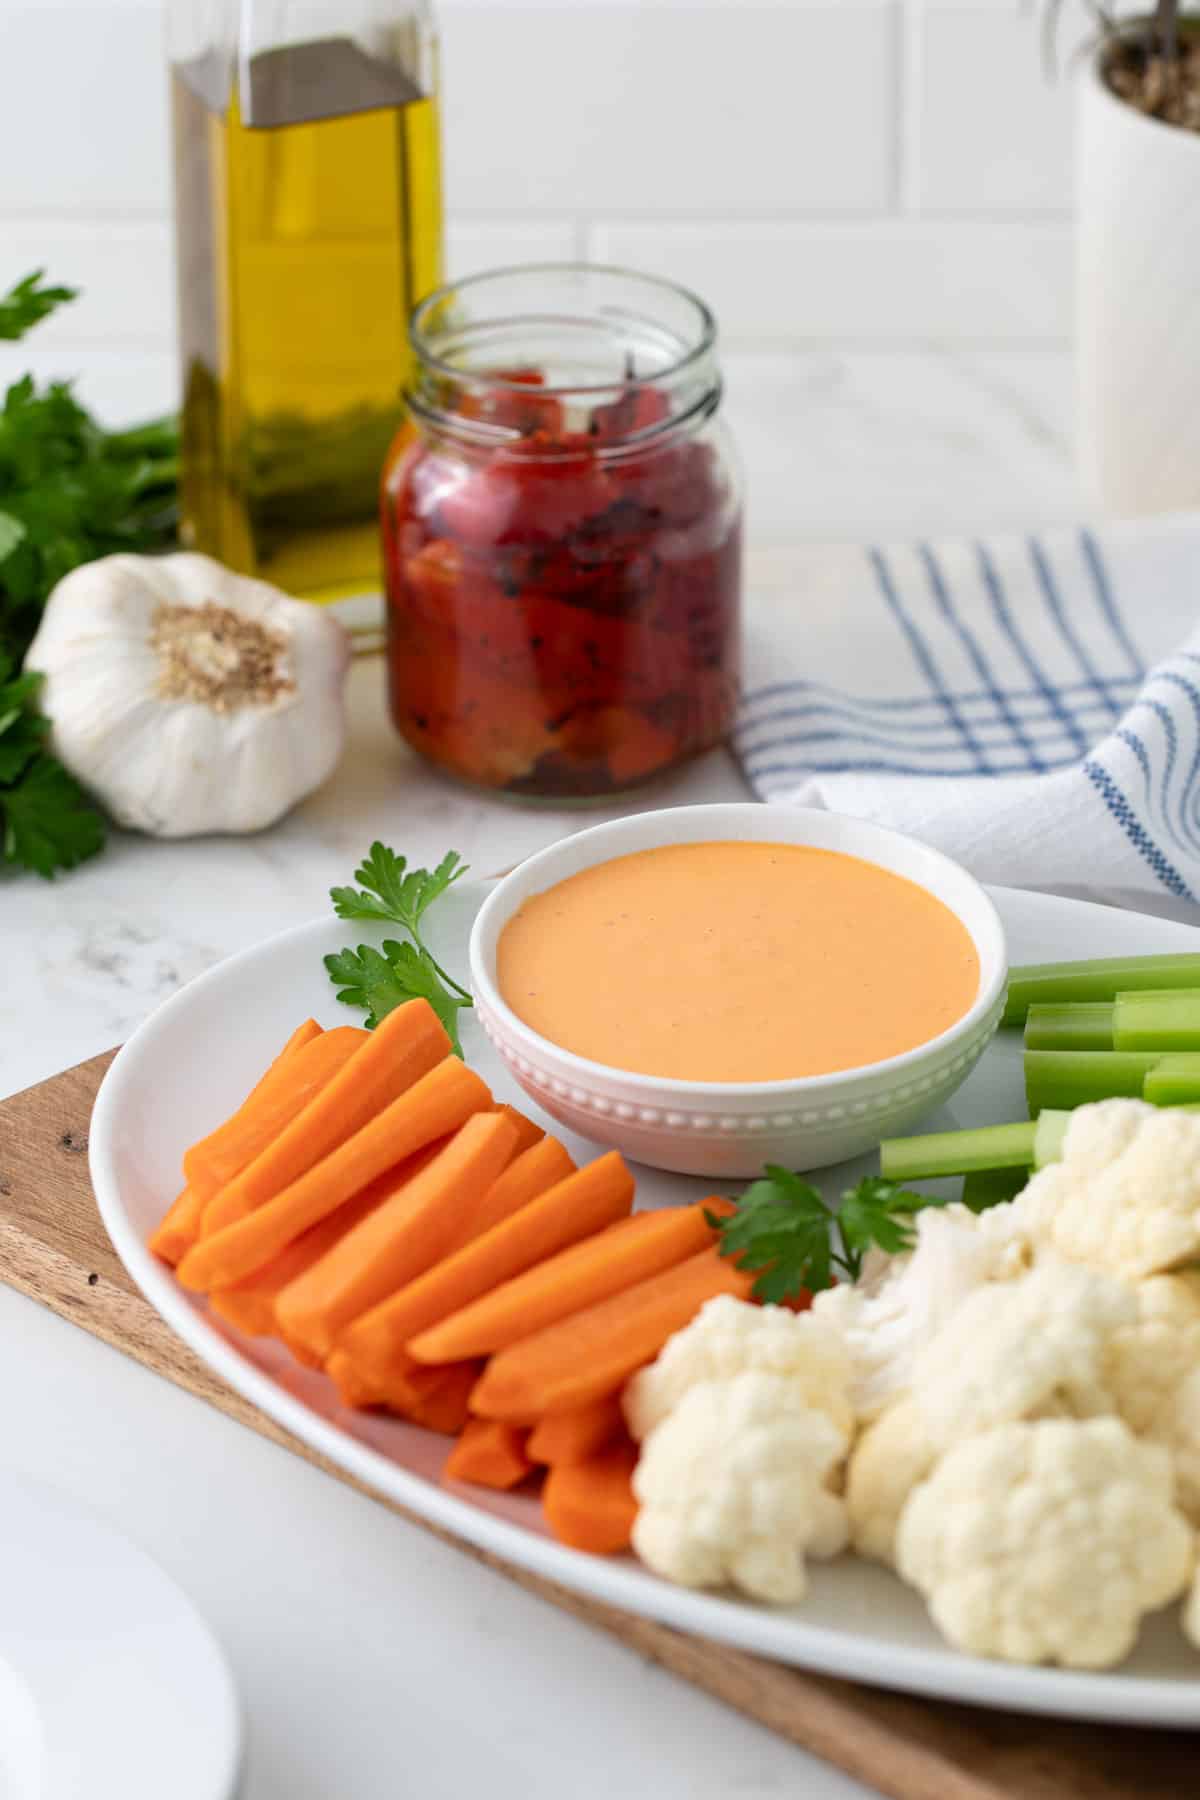 A small bowl of red pepper aioli on a platter with carrots, celery, and cauliflower.